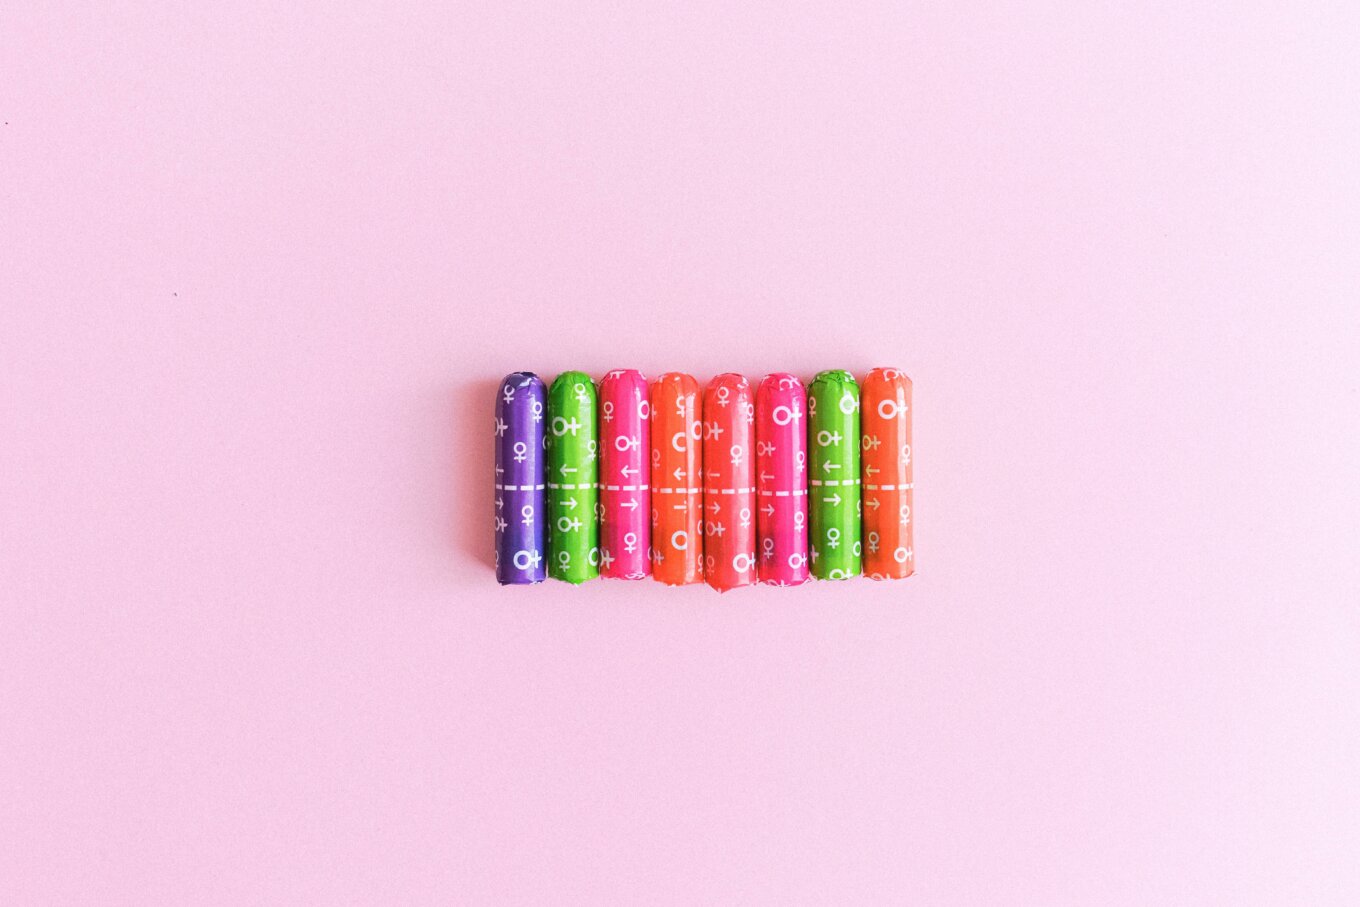 A row of different coloured tampons on a pink background.